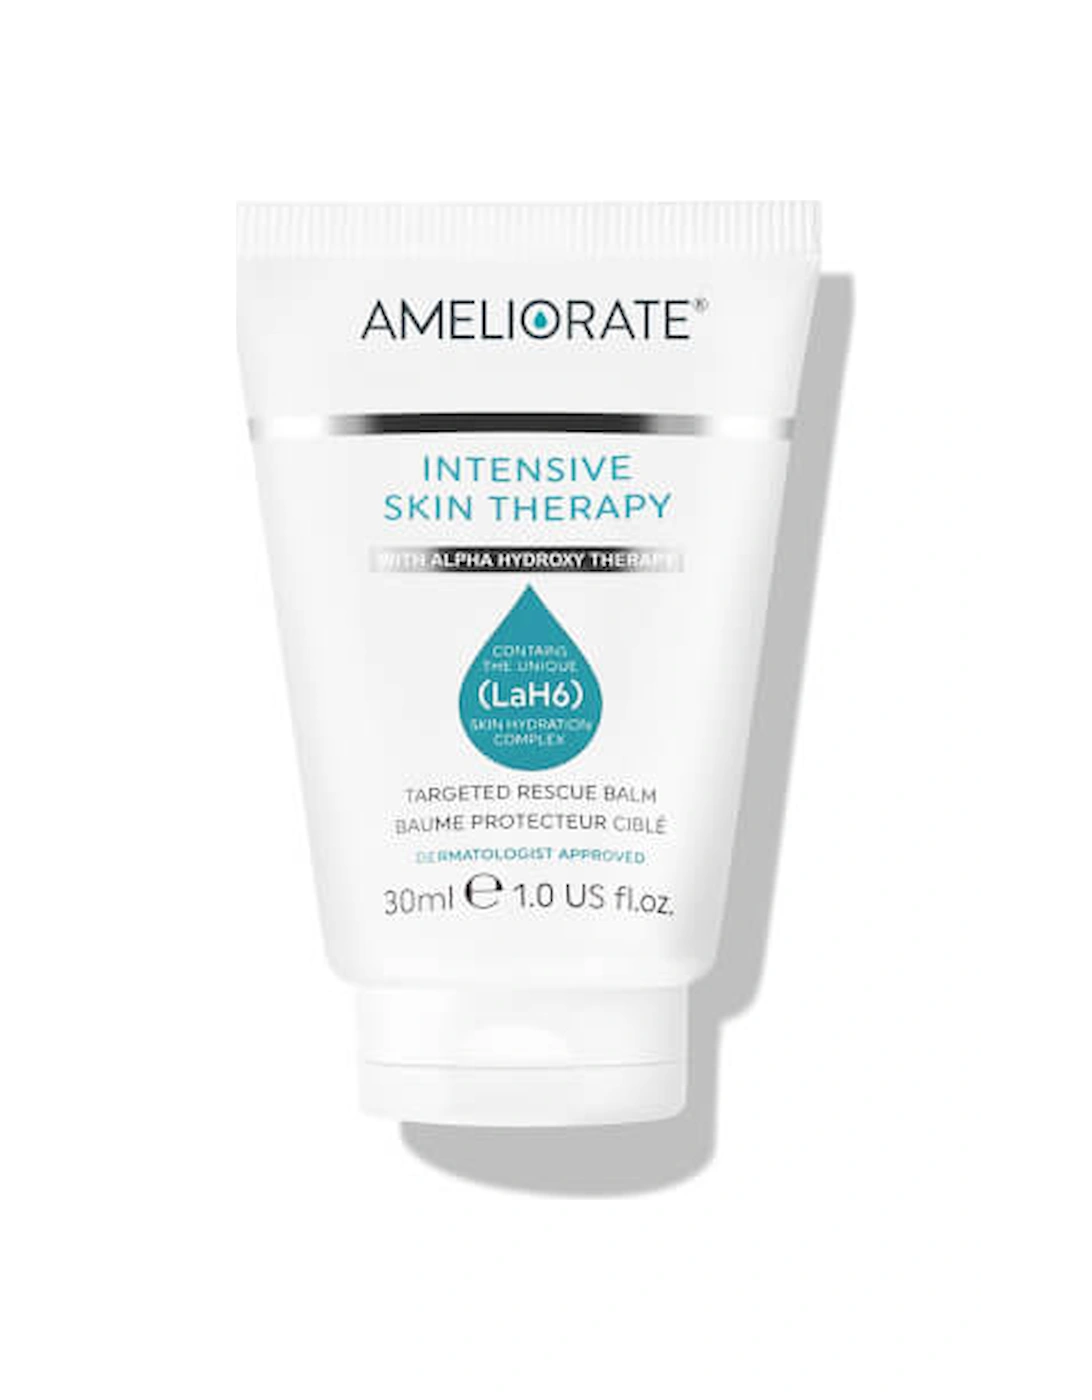 Intensive Skin Therapy 30ml - AMELIORATE, 2 of 1